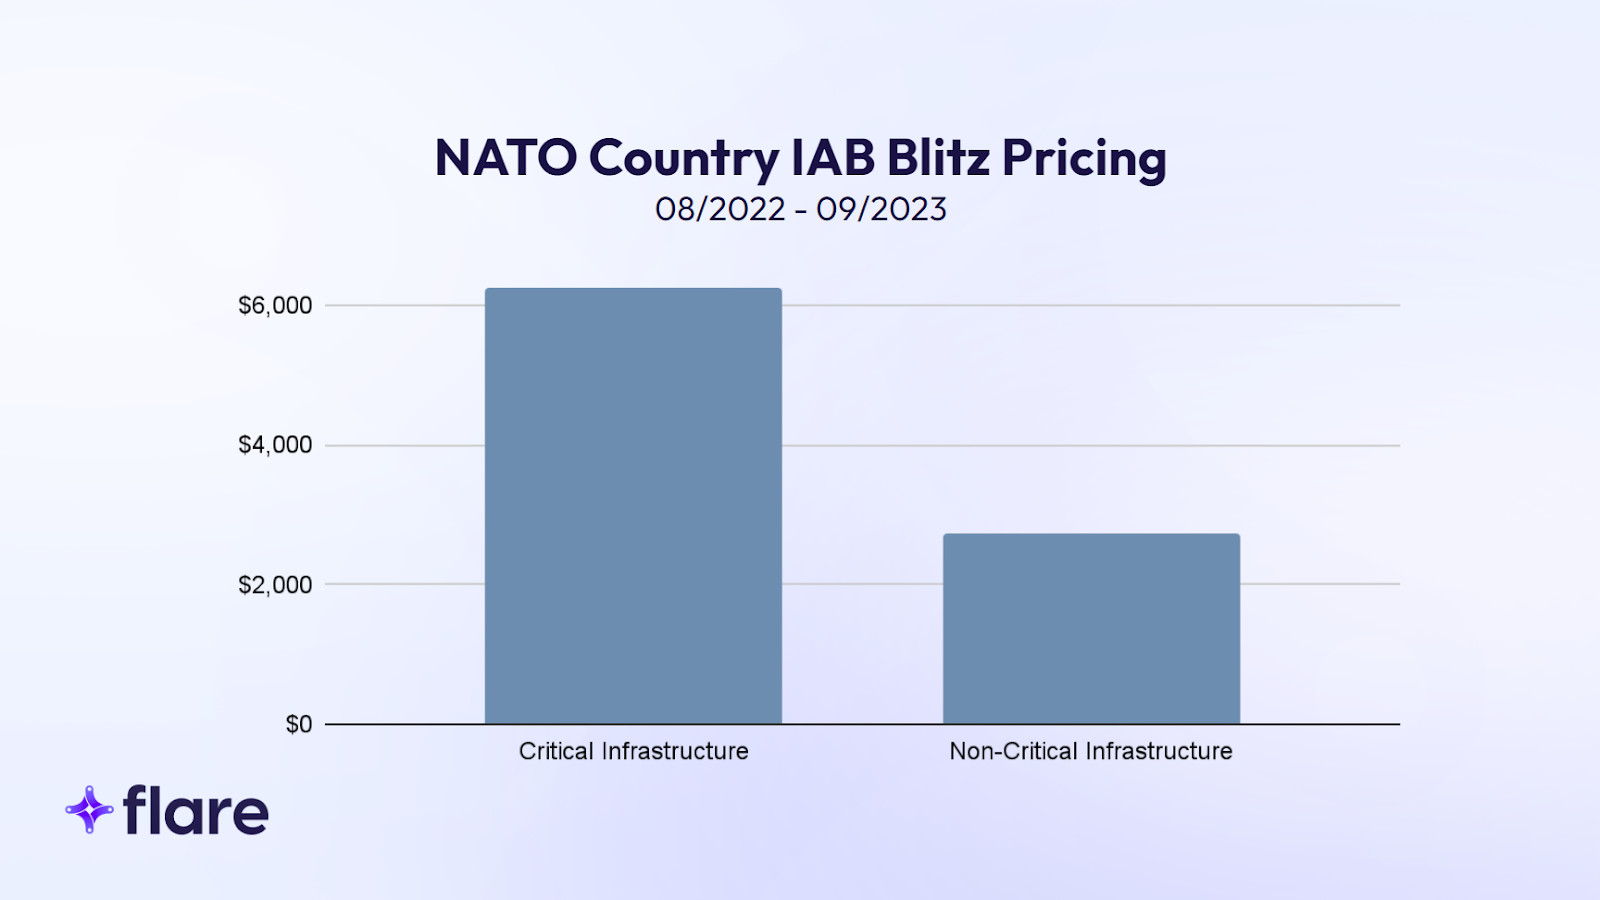 Bar graph with title "NATO Country IAB Blitz Pricing" that compares Critical Infrastructure which has the bar going to $6,000 and the Non-Critical Infrastructure bar going up to $3,000.